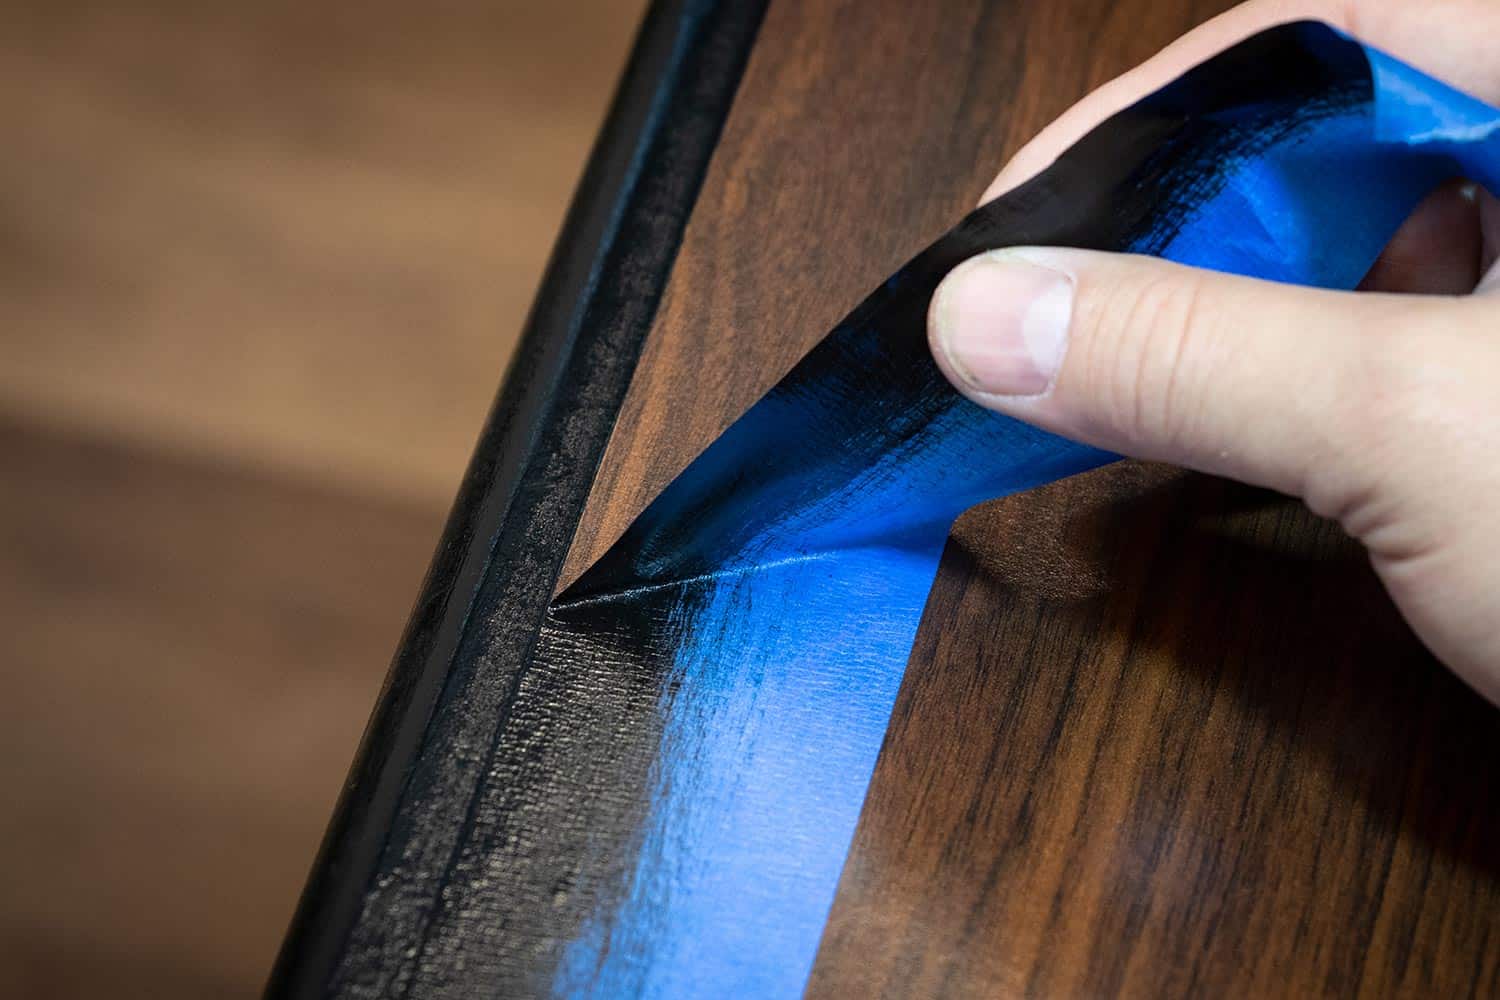 Hand removing blue painter's tape from edge of refinished furniture paint job